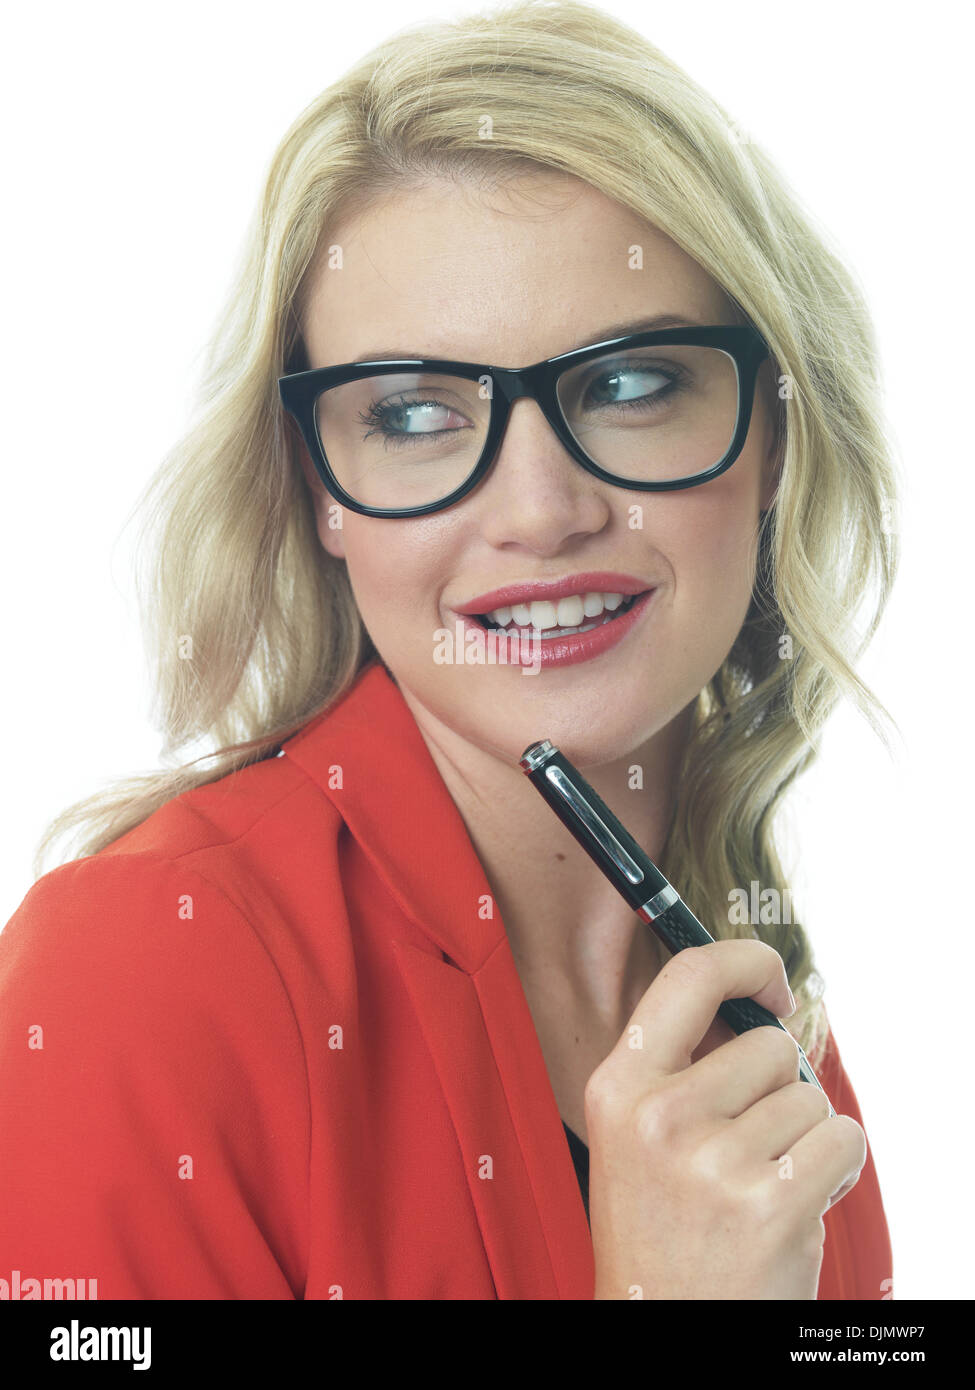 Attractive Young Business Woman Holding A Pen With A Winning Strategy Discovering The Missing Piece Of The Puzzle Against A White Background Stock Photo